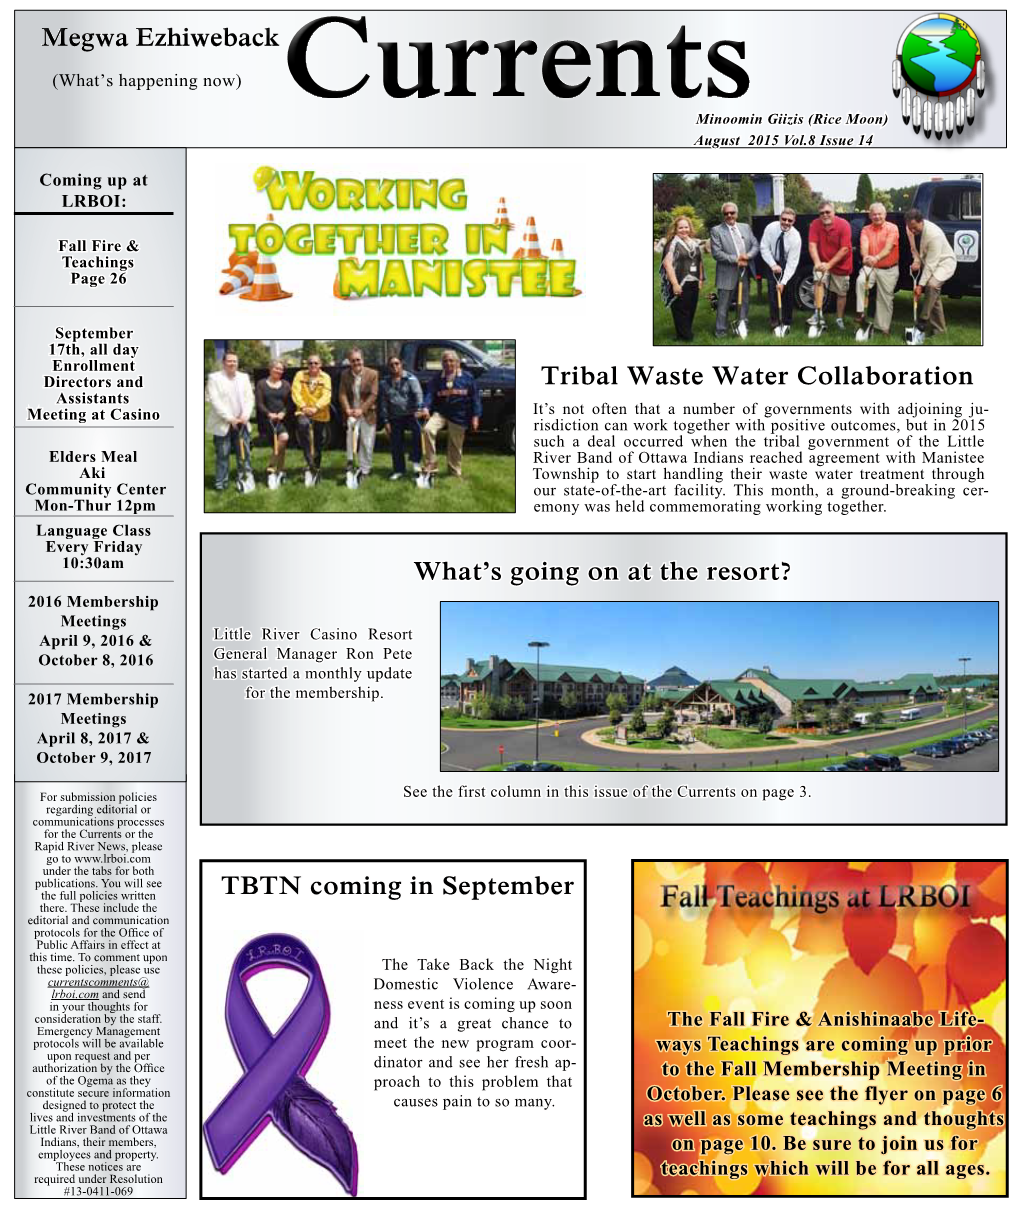 August 2015 Vol.8 Issue 14